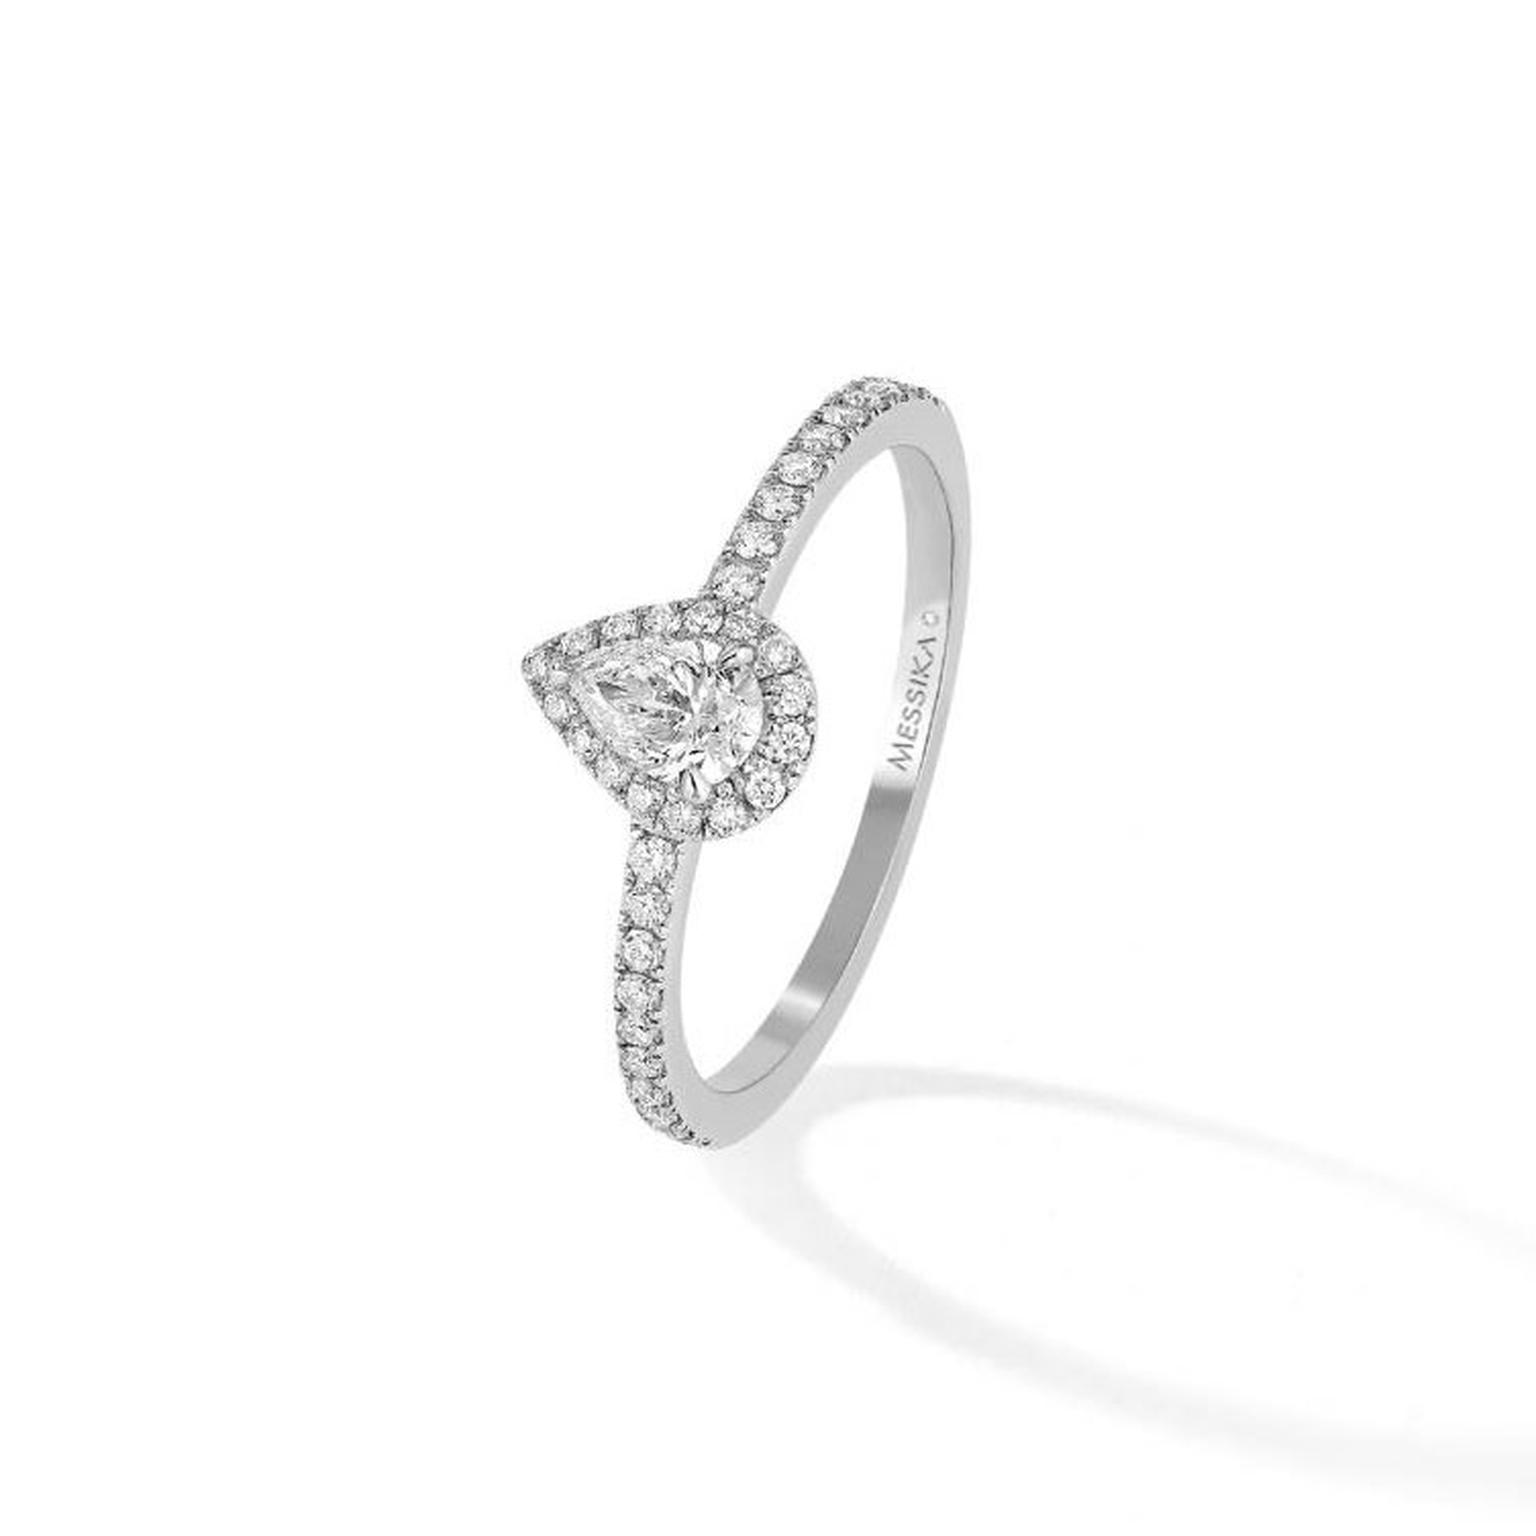 Messika Joy pear-shape solitaire engagement ring